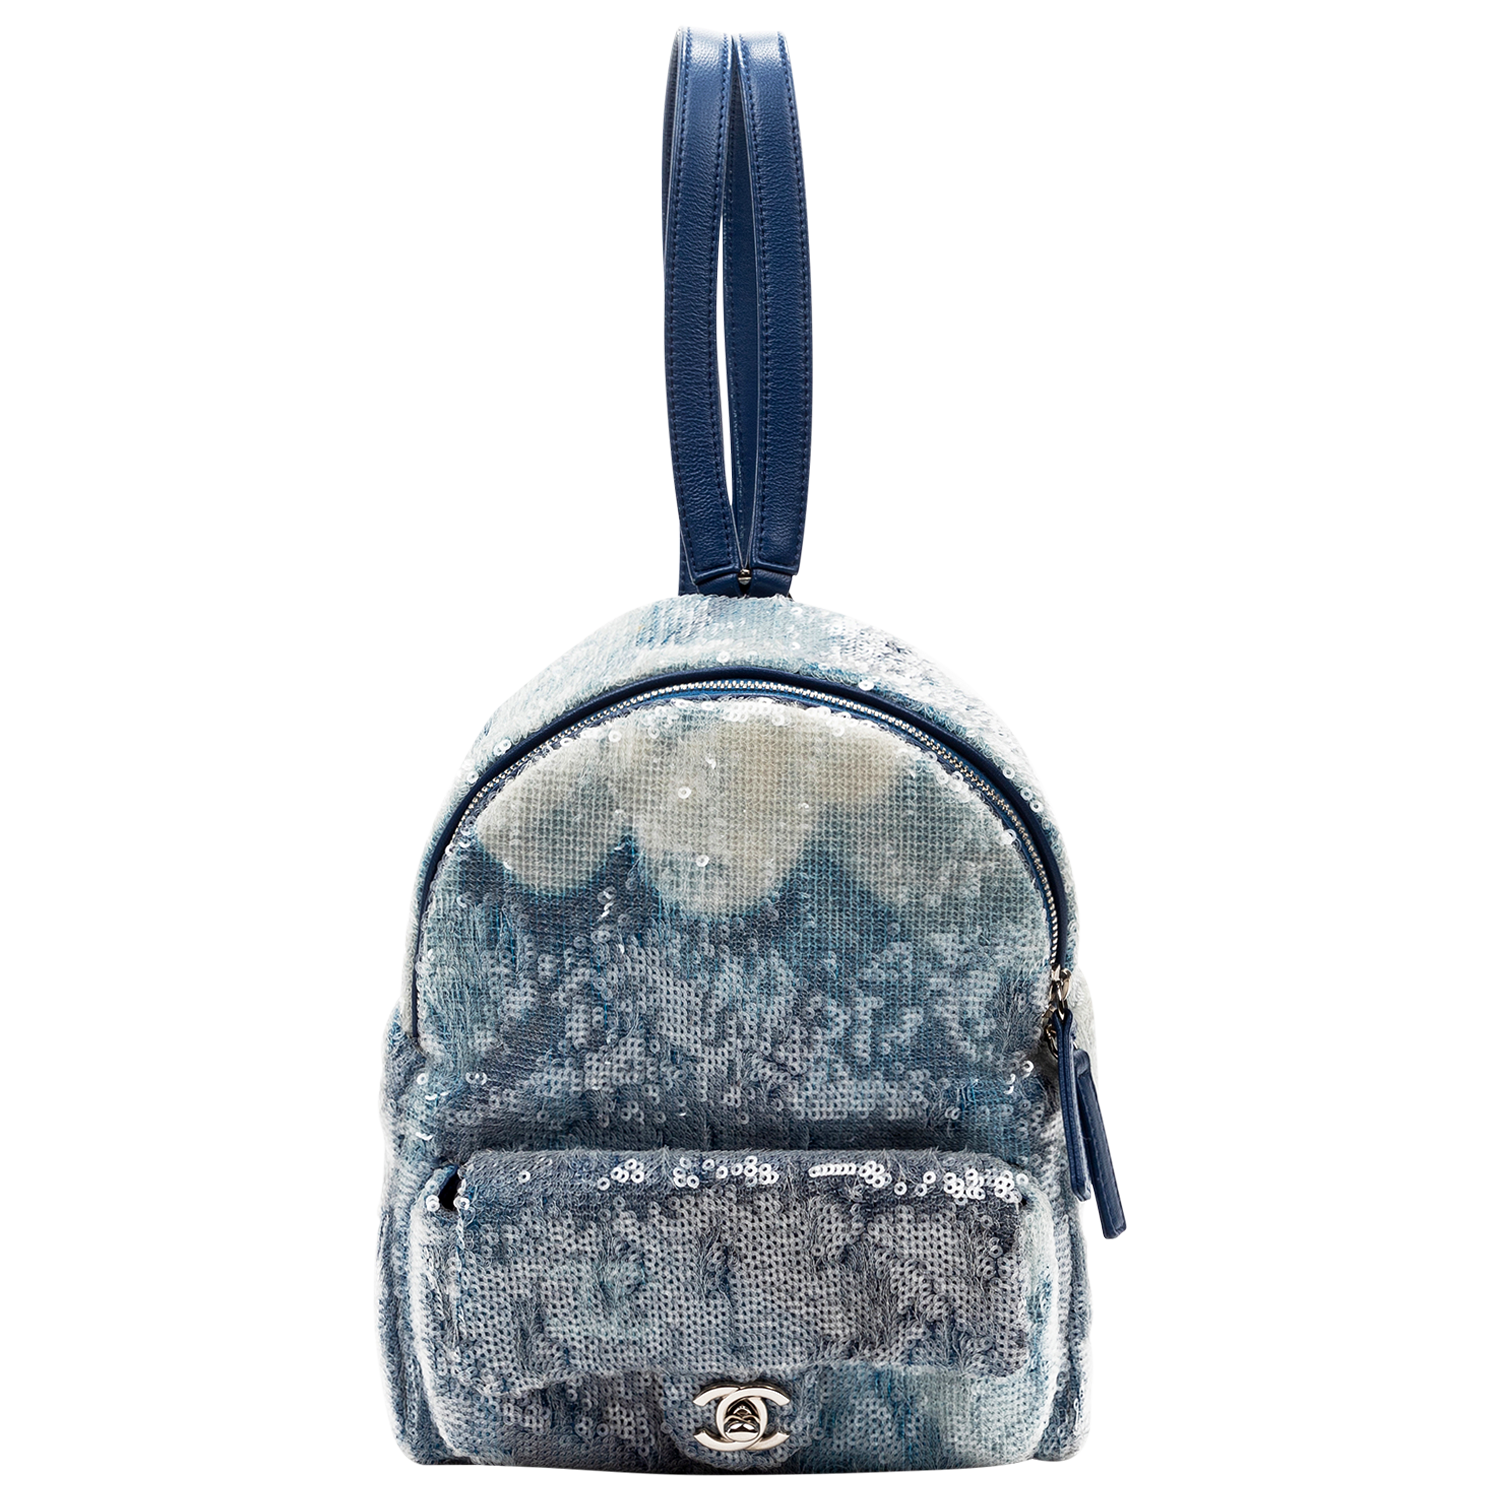 Chanel Spring/Summer 2018 Act II Blue Sequin Coco Cuba Backpack - shop 